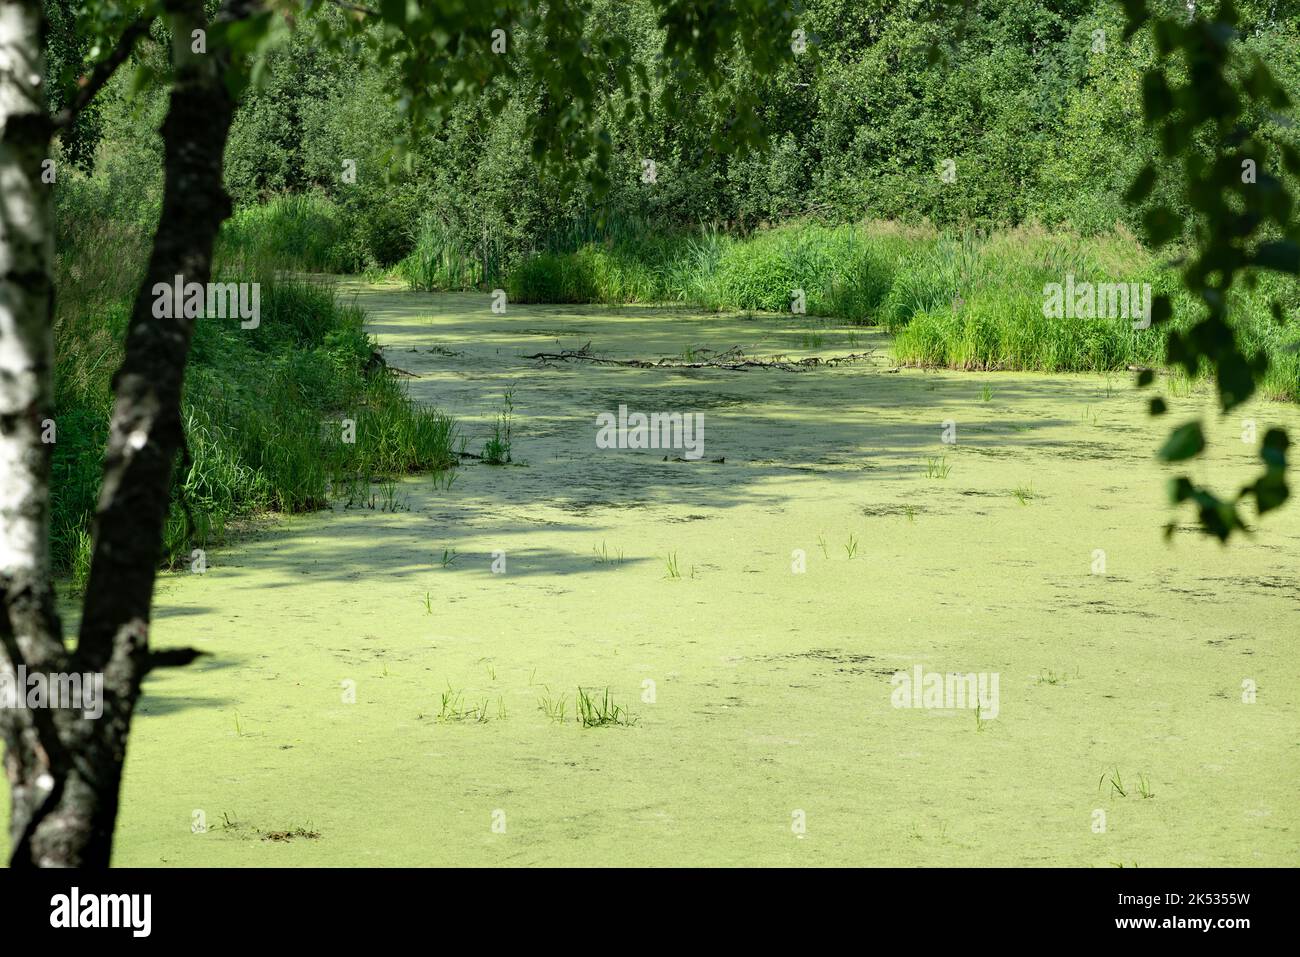 Duckweed swamp area with standing water and common duckweed on surface among in Russia Stock Photo